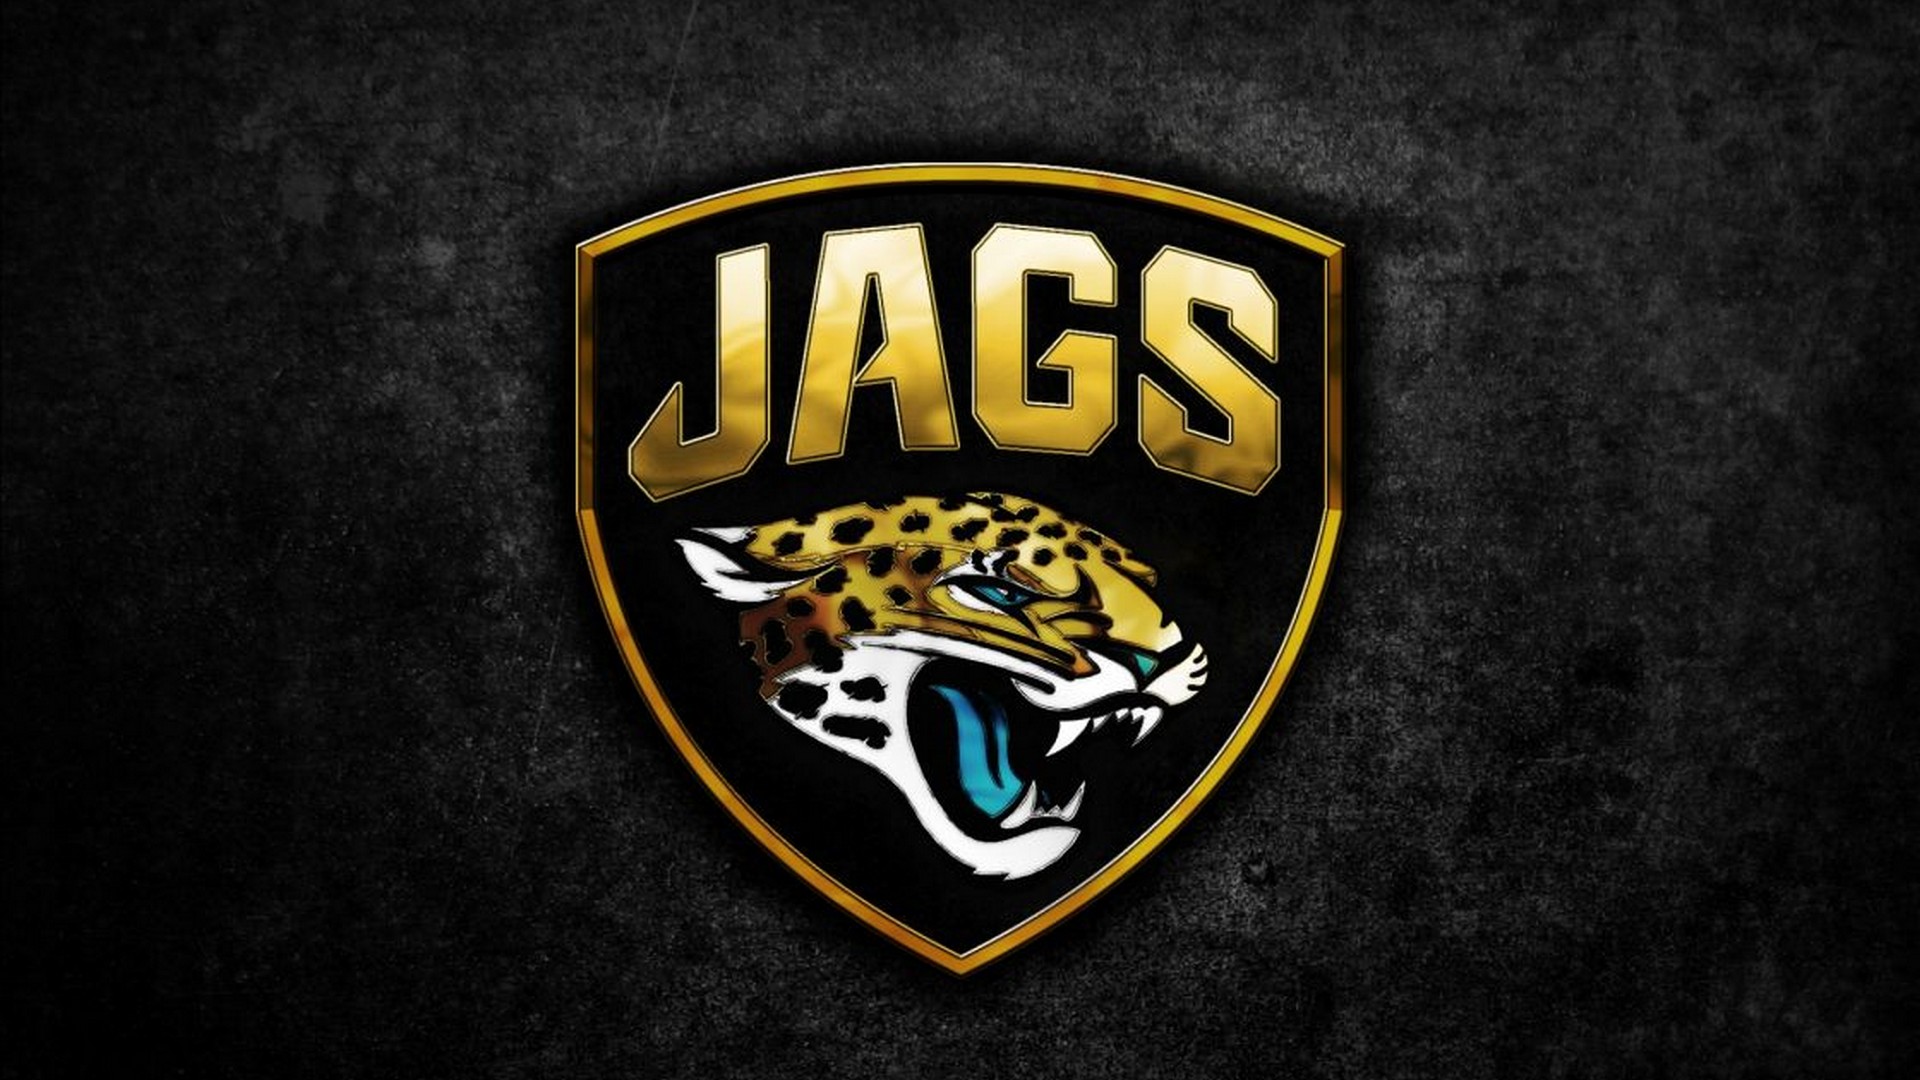 Jacksonville Jaguars Mac Backgrounds with resolution 1920x1080 pixel. You can make this wallpaper for your Mac or Windows Desktop Background, iPhone, Android or Tablet and another Smartphone device